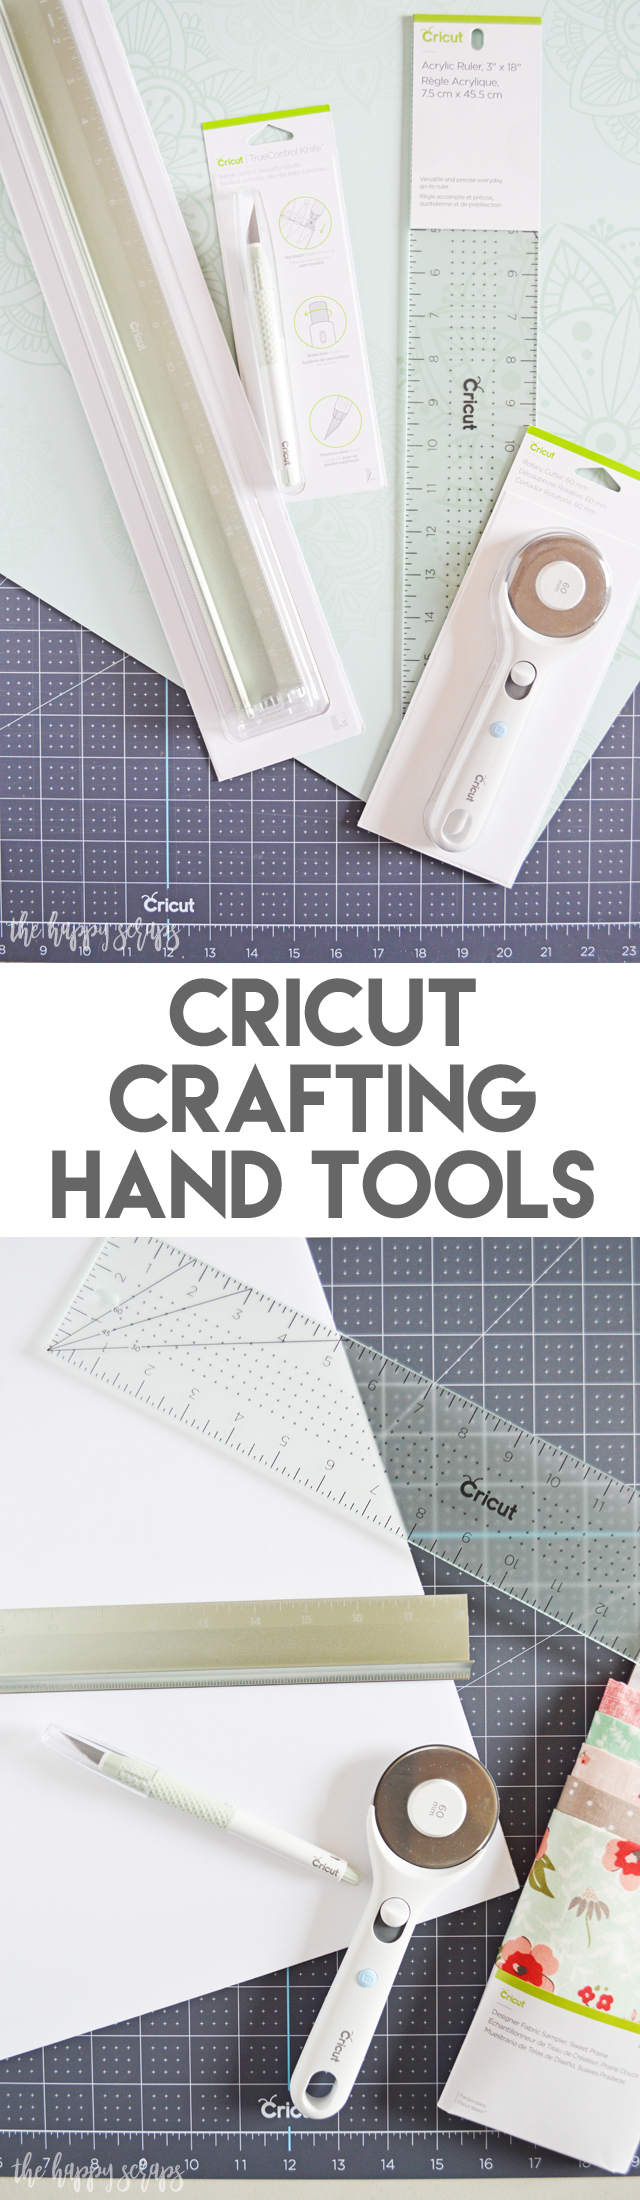 These Cricut Crafting Hand Tools are some of my favorites! The Cutting Ruler + TrueControl Knife and Rotary Cutter + Acrylic Ruler both go with the Self-Healing Cutting Mat so well! I find myself reaching for these all the time! 